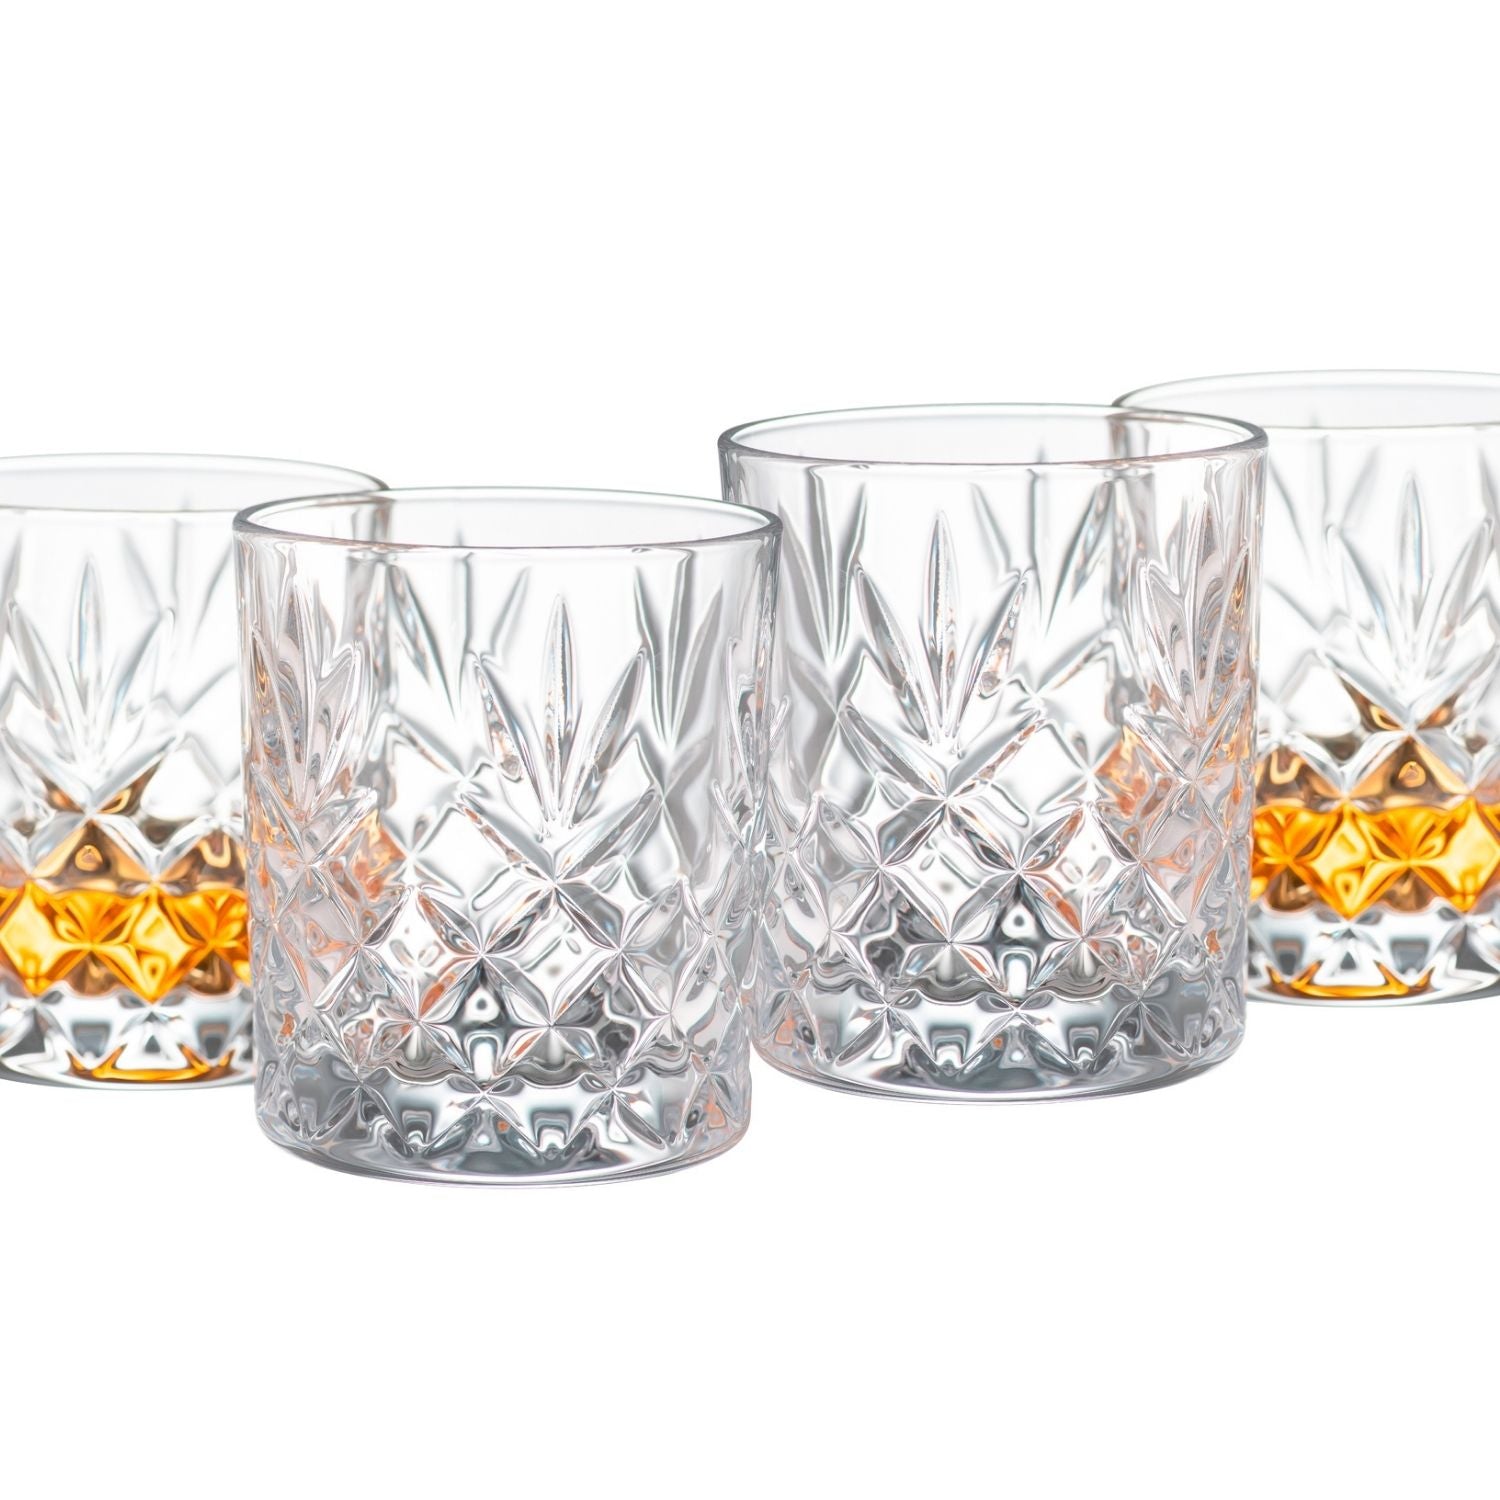 Galway Crystal Galway Crystal Renmore Set of 4 Whiskey Glasses 1 Shaws Department Stores